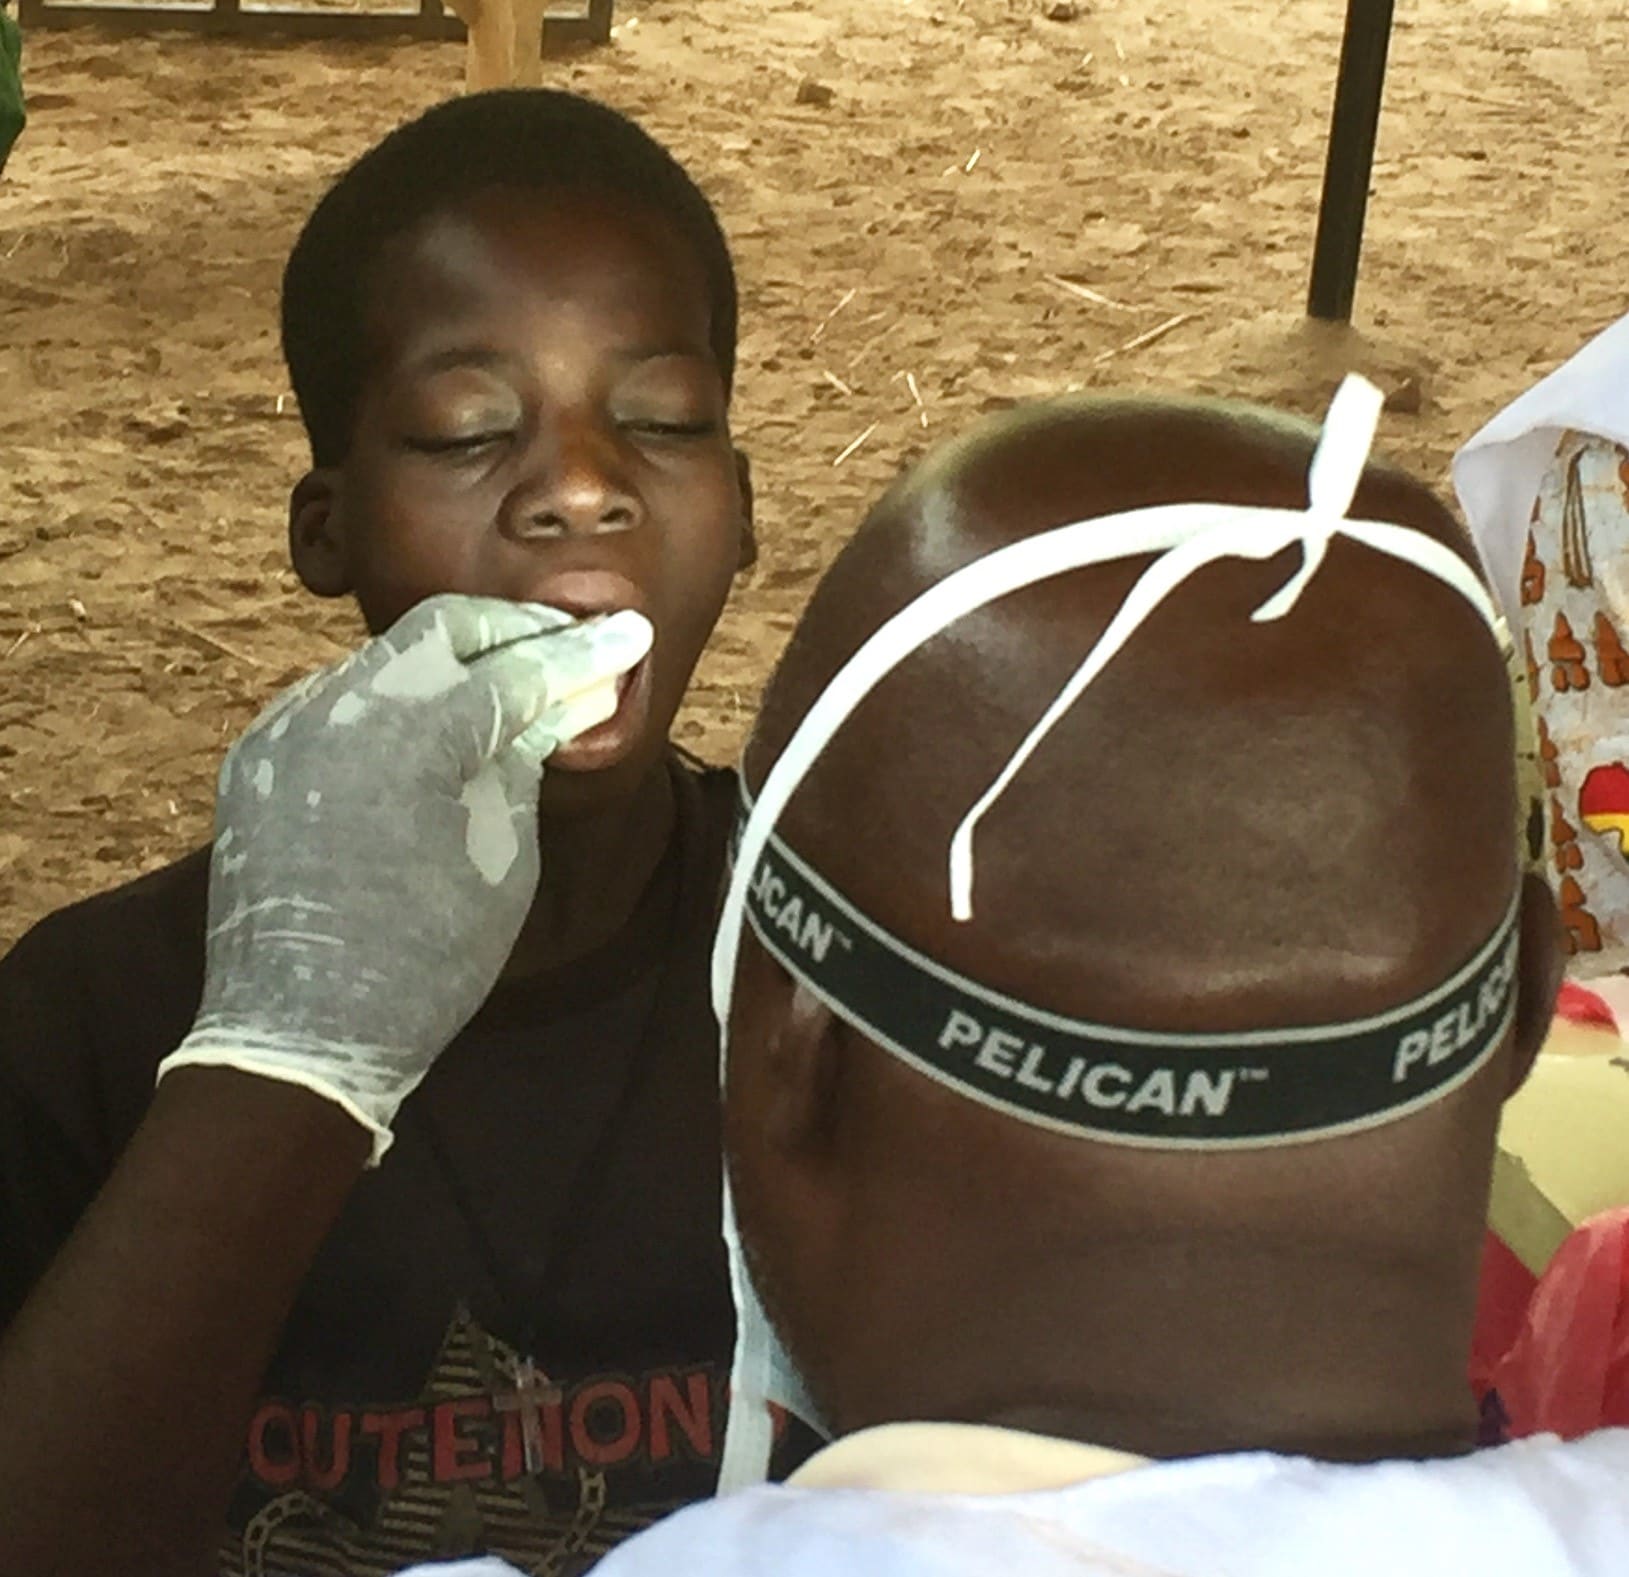 A technician swabs the cheek of a child as part of an effort supported by CDC to gauge the long-term impact of a new meningitis vaccine at a makeshift clinic in a remote village two hours from Burkina Faso’s capital. (Source: Charles Pope, CDC)